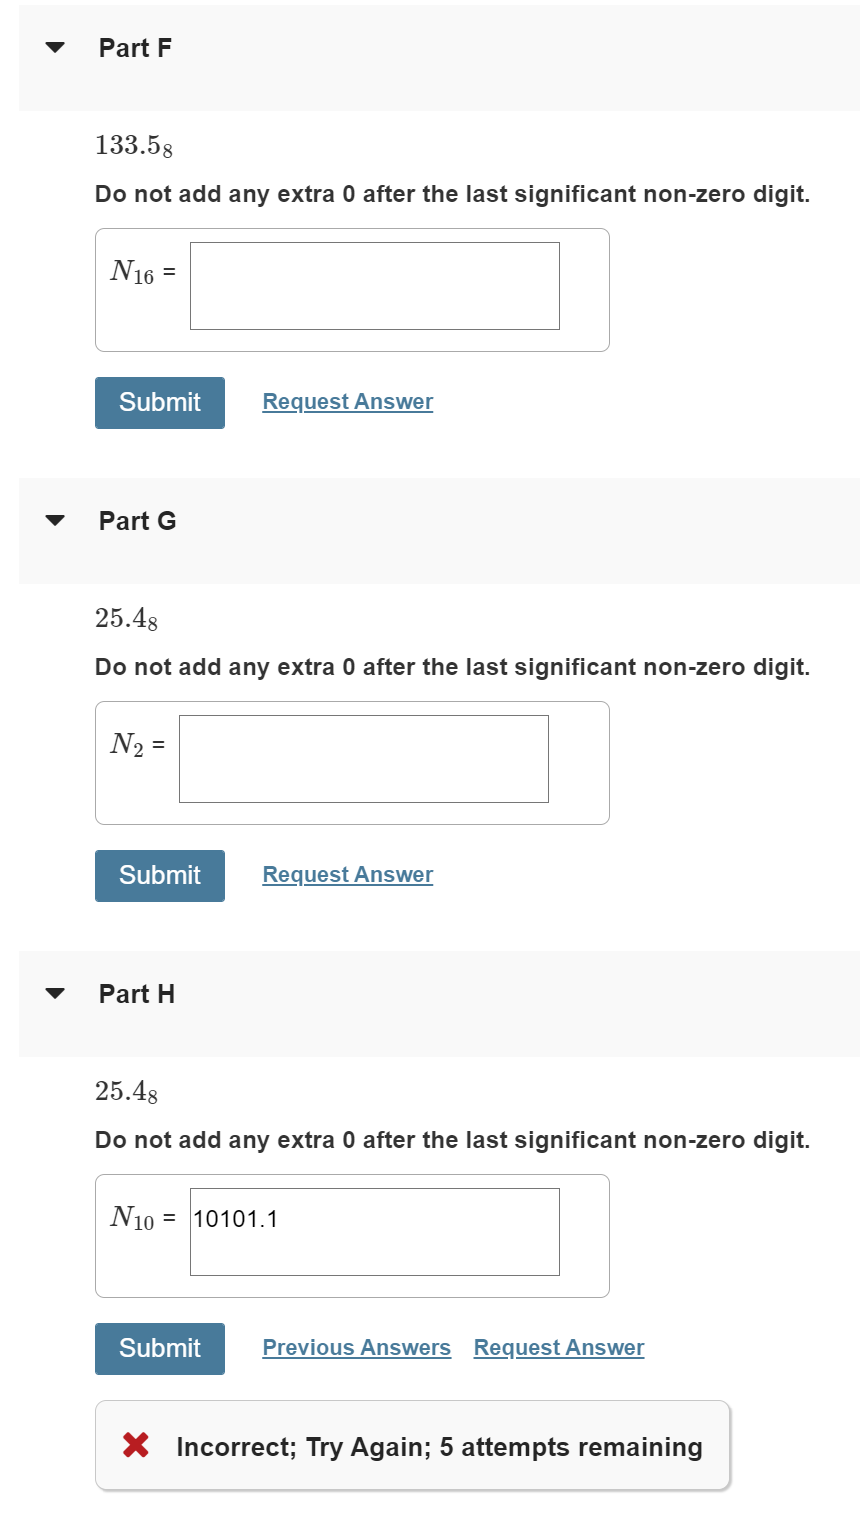 Part F
133.58
Do not add any extra 0 after the last significant non-zero digit.
N16
Submit
Request Answer
Part G
25.48
Do not add any extra 0 after the last significant non-zero digit.
N2 =
Submit
Request Answer
Part H
25.48
Do not add any extra 0 after the last significant non-zero digit.
N10 = 10101.1
Submit
Previous Answers Request Answer
X Incorrect; Try Again; 5 attempts remaining
